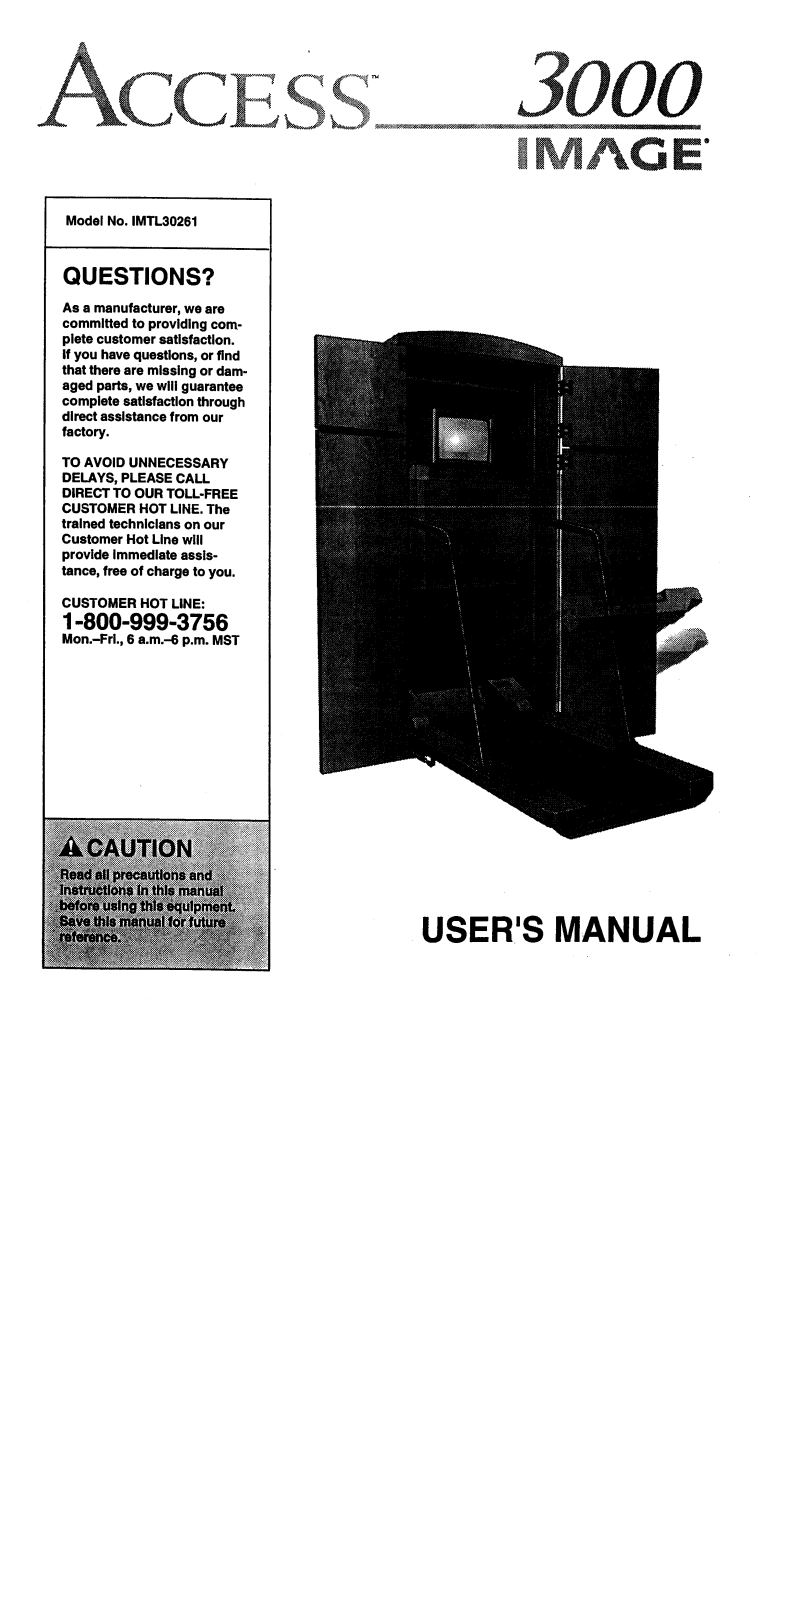 Image IMTL30261 Owner's Manual